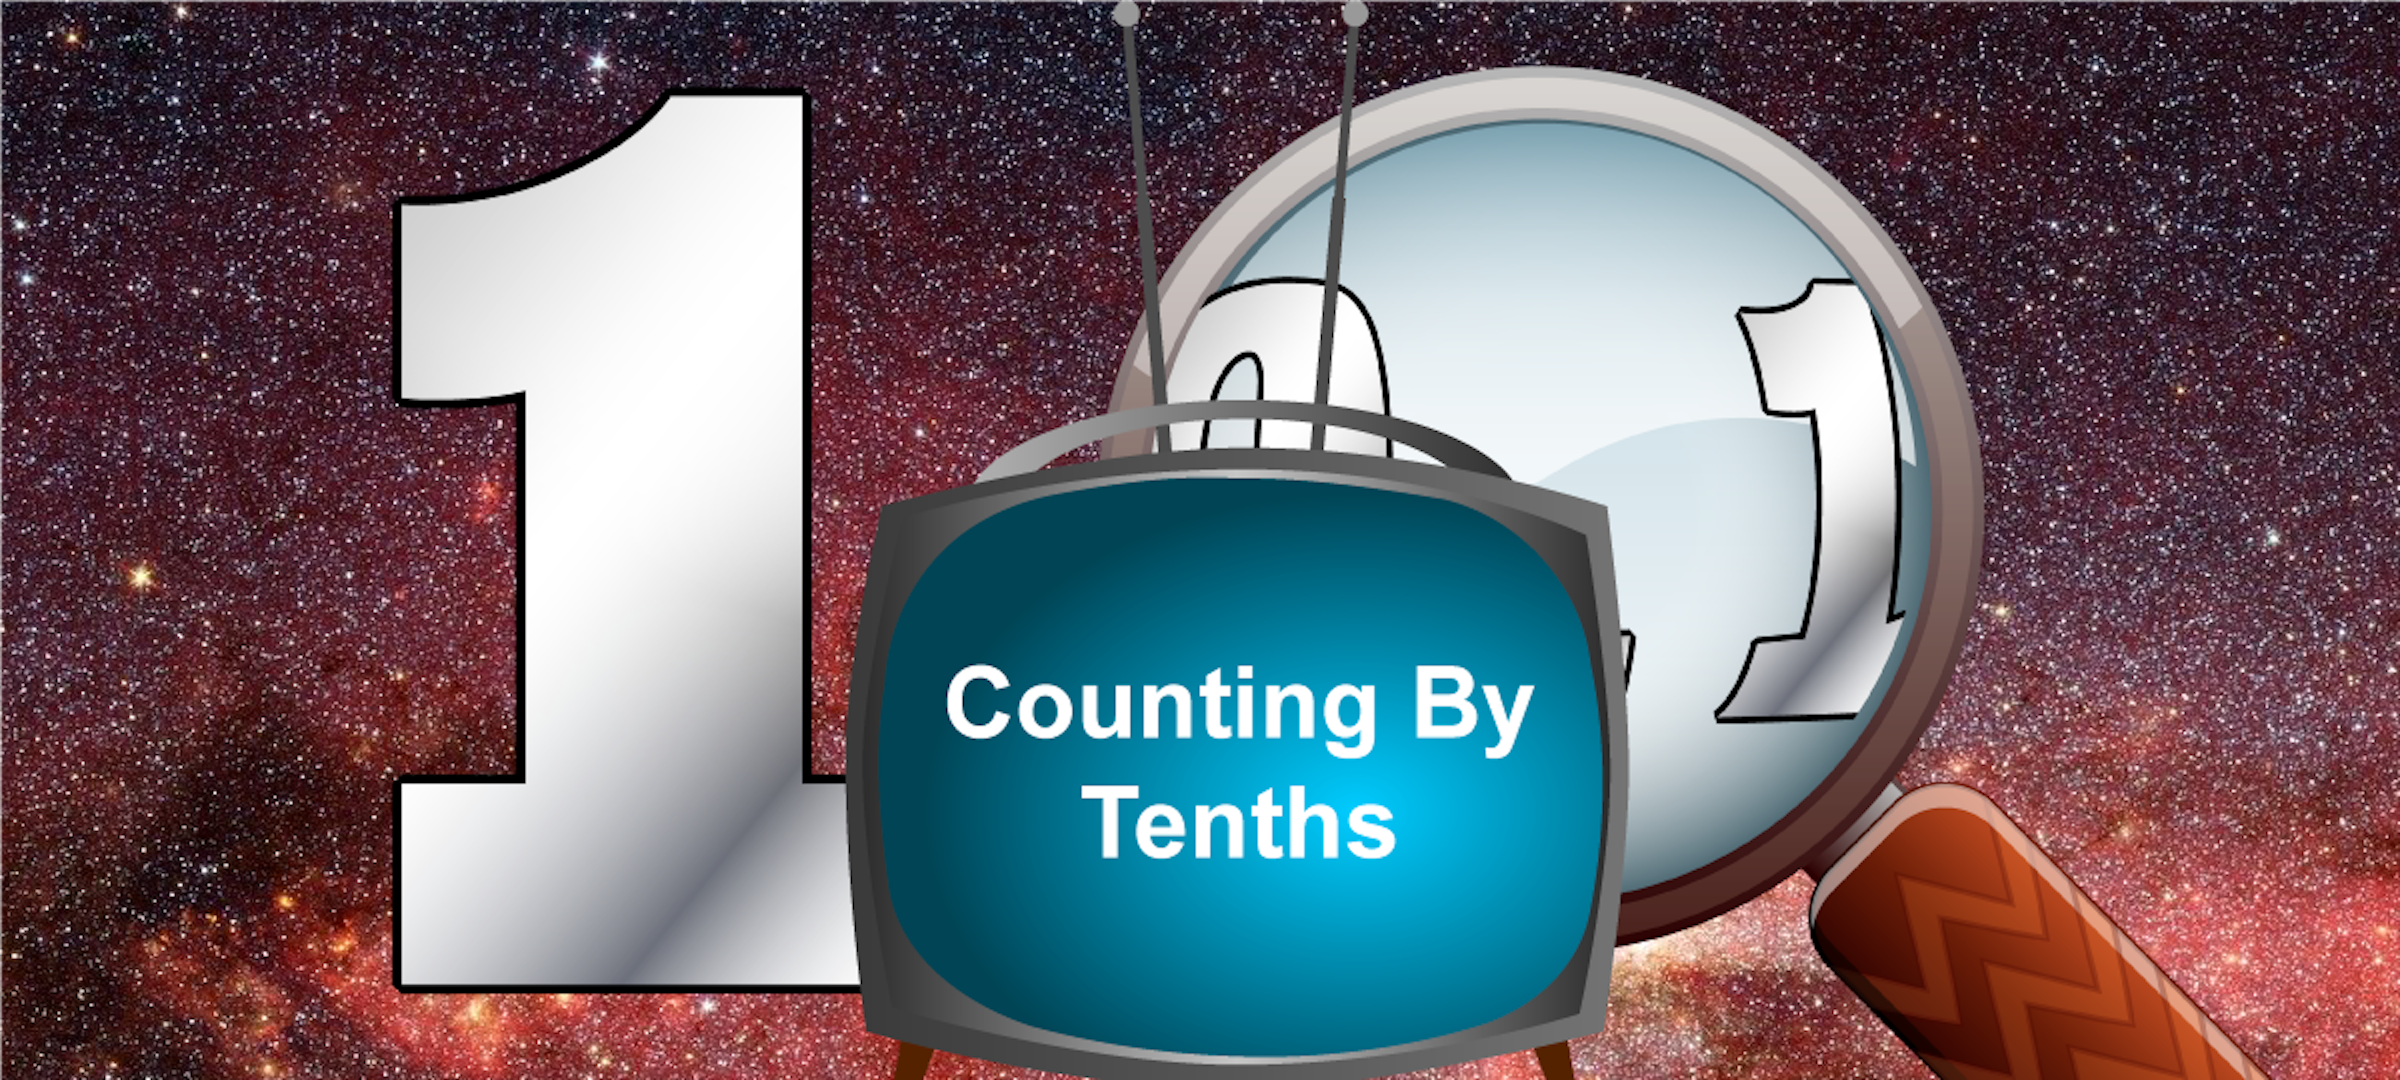 Video Tutorial: Place Value--Counting by Tenths